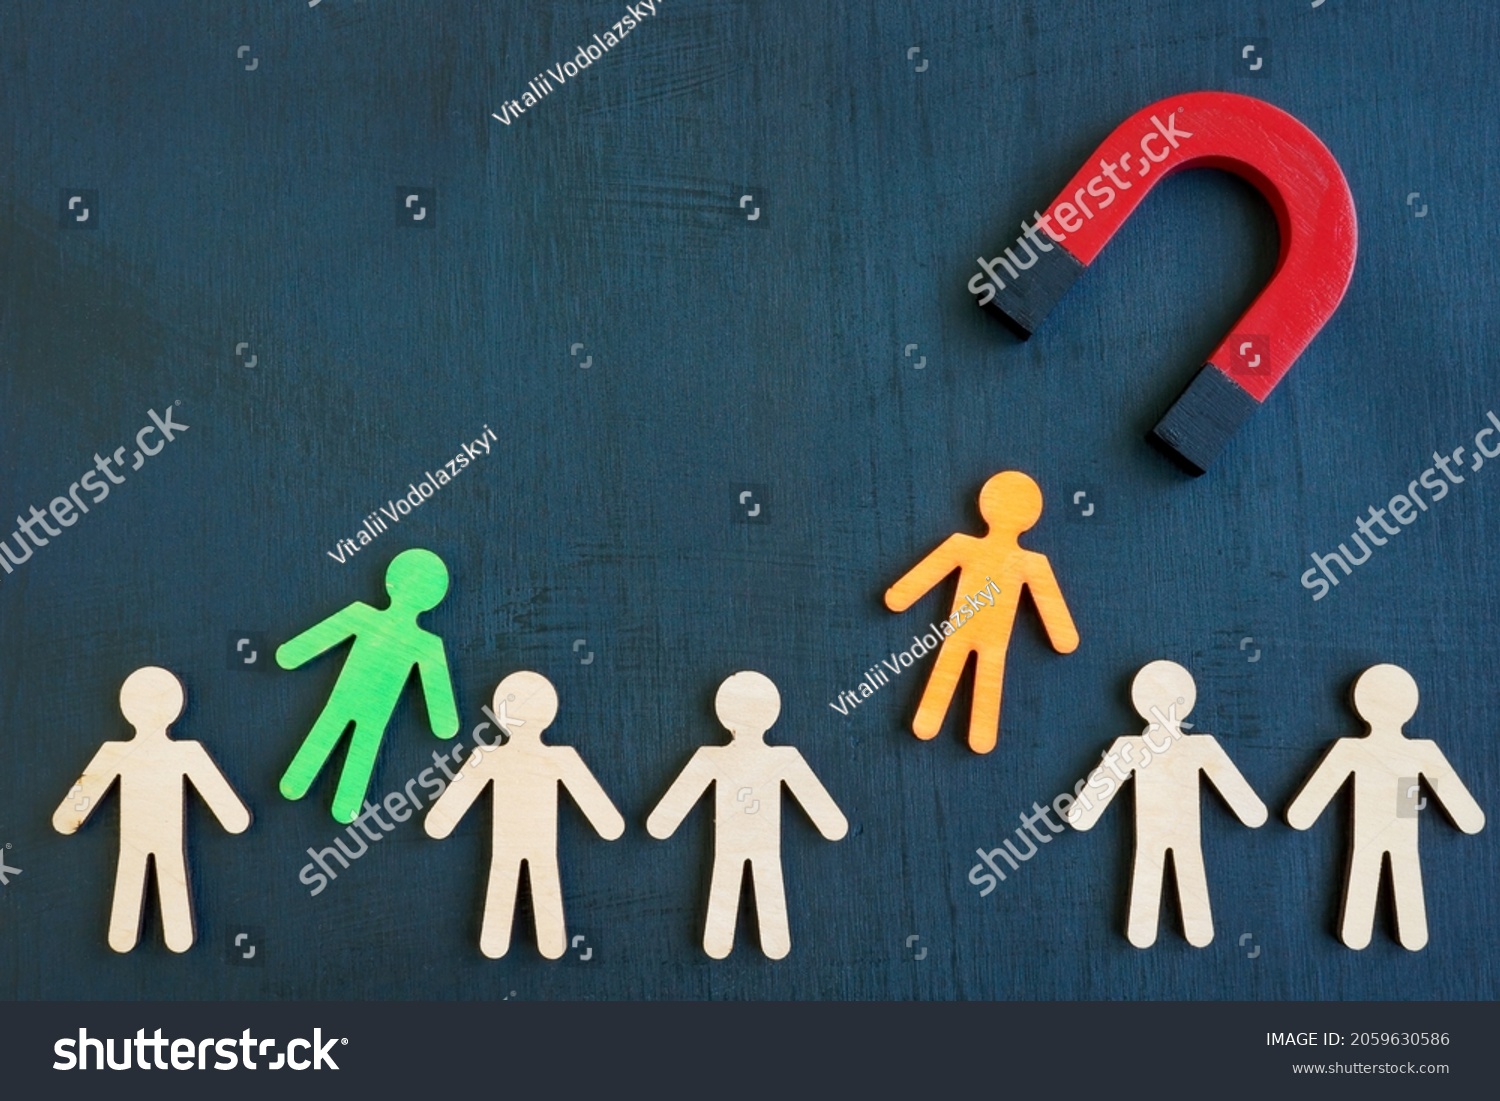 The magnet attracts figures from the crowd. Talent acquisition concept. #2059630586